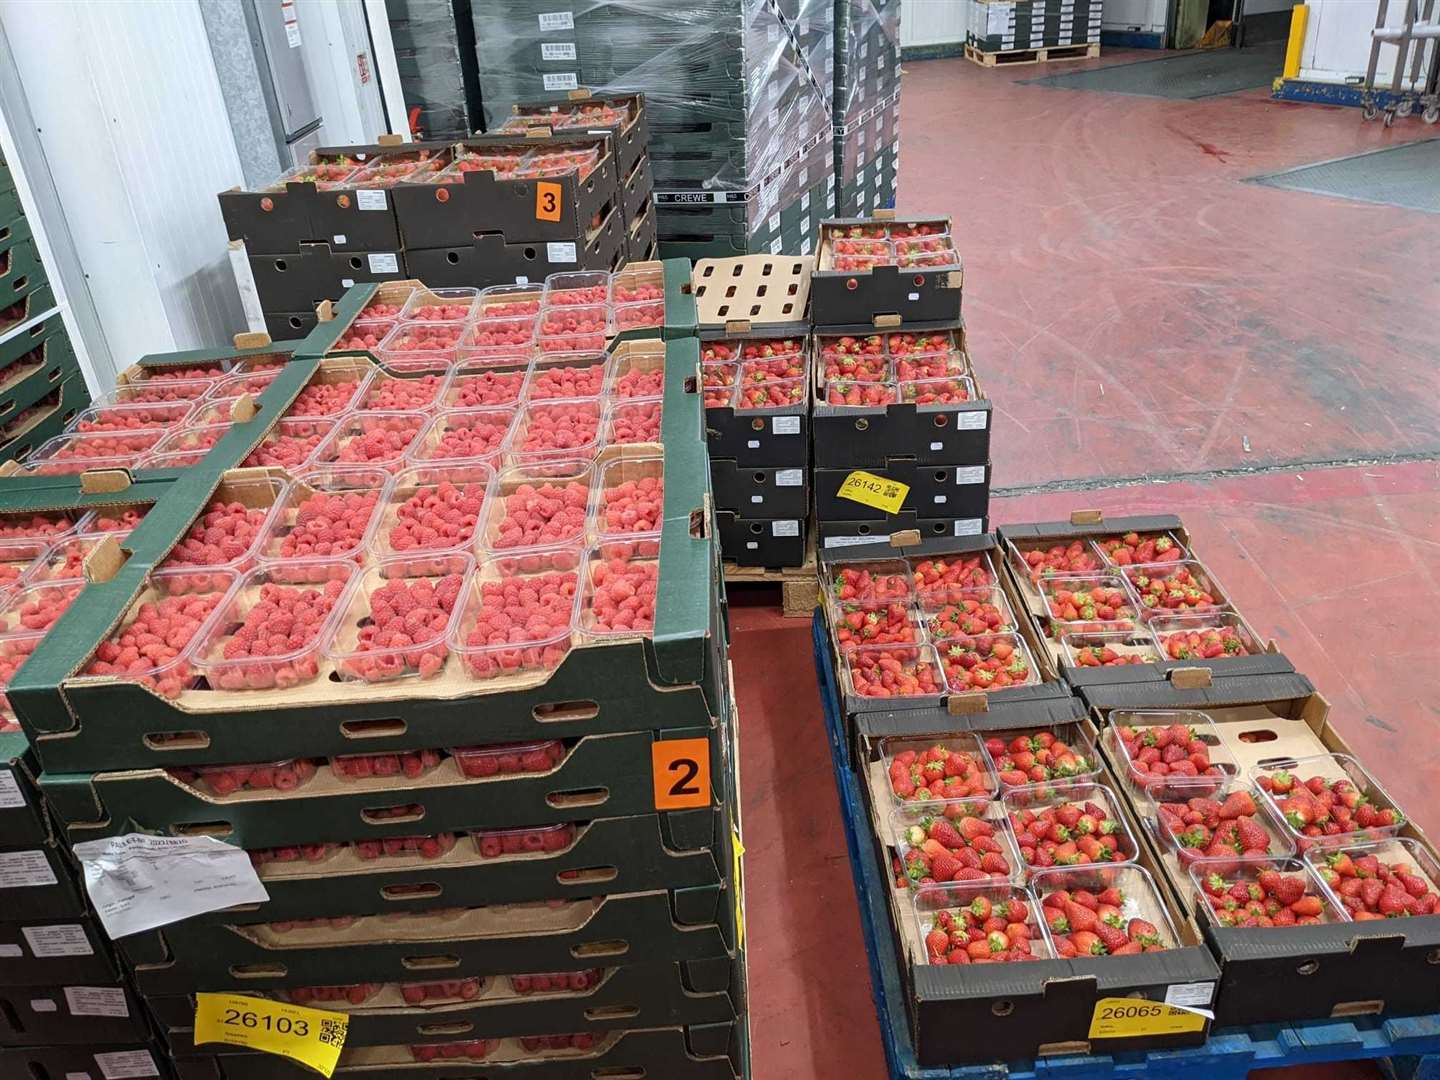 Winterwood Farms pack 20,000 tons of soft fruit every year